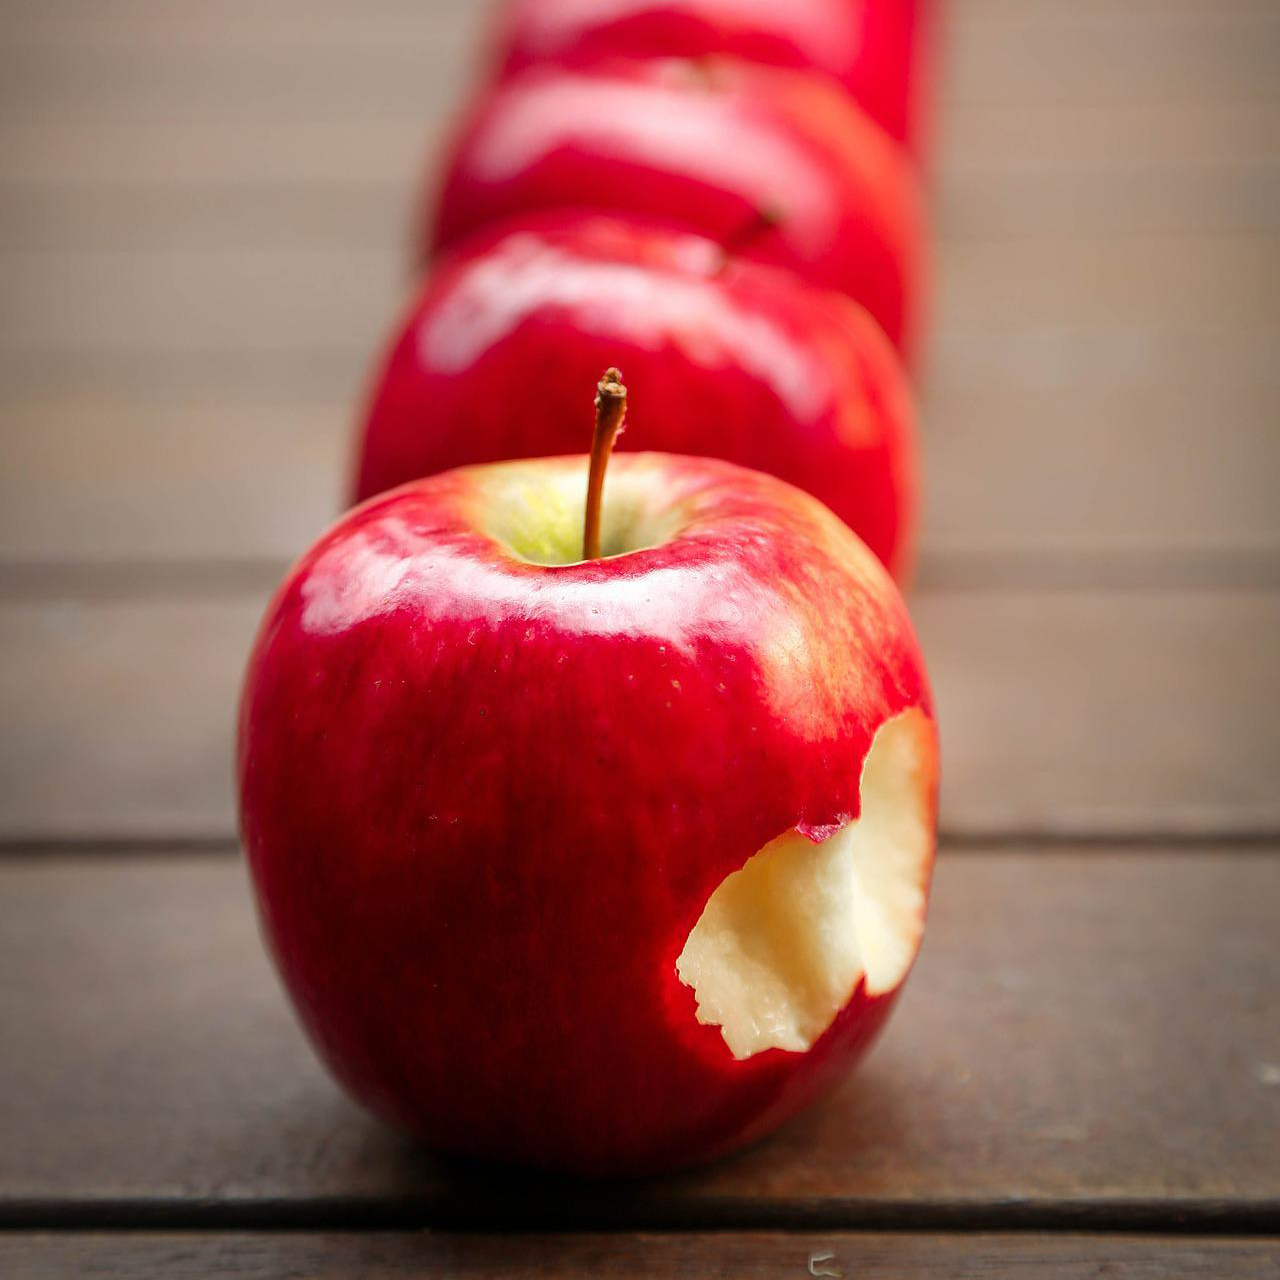 Red apples in a row